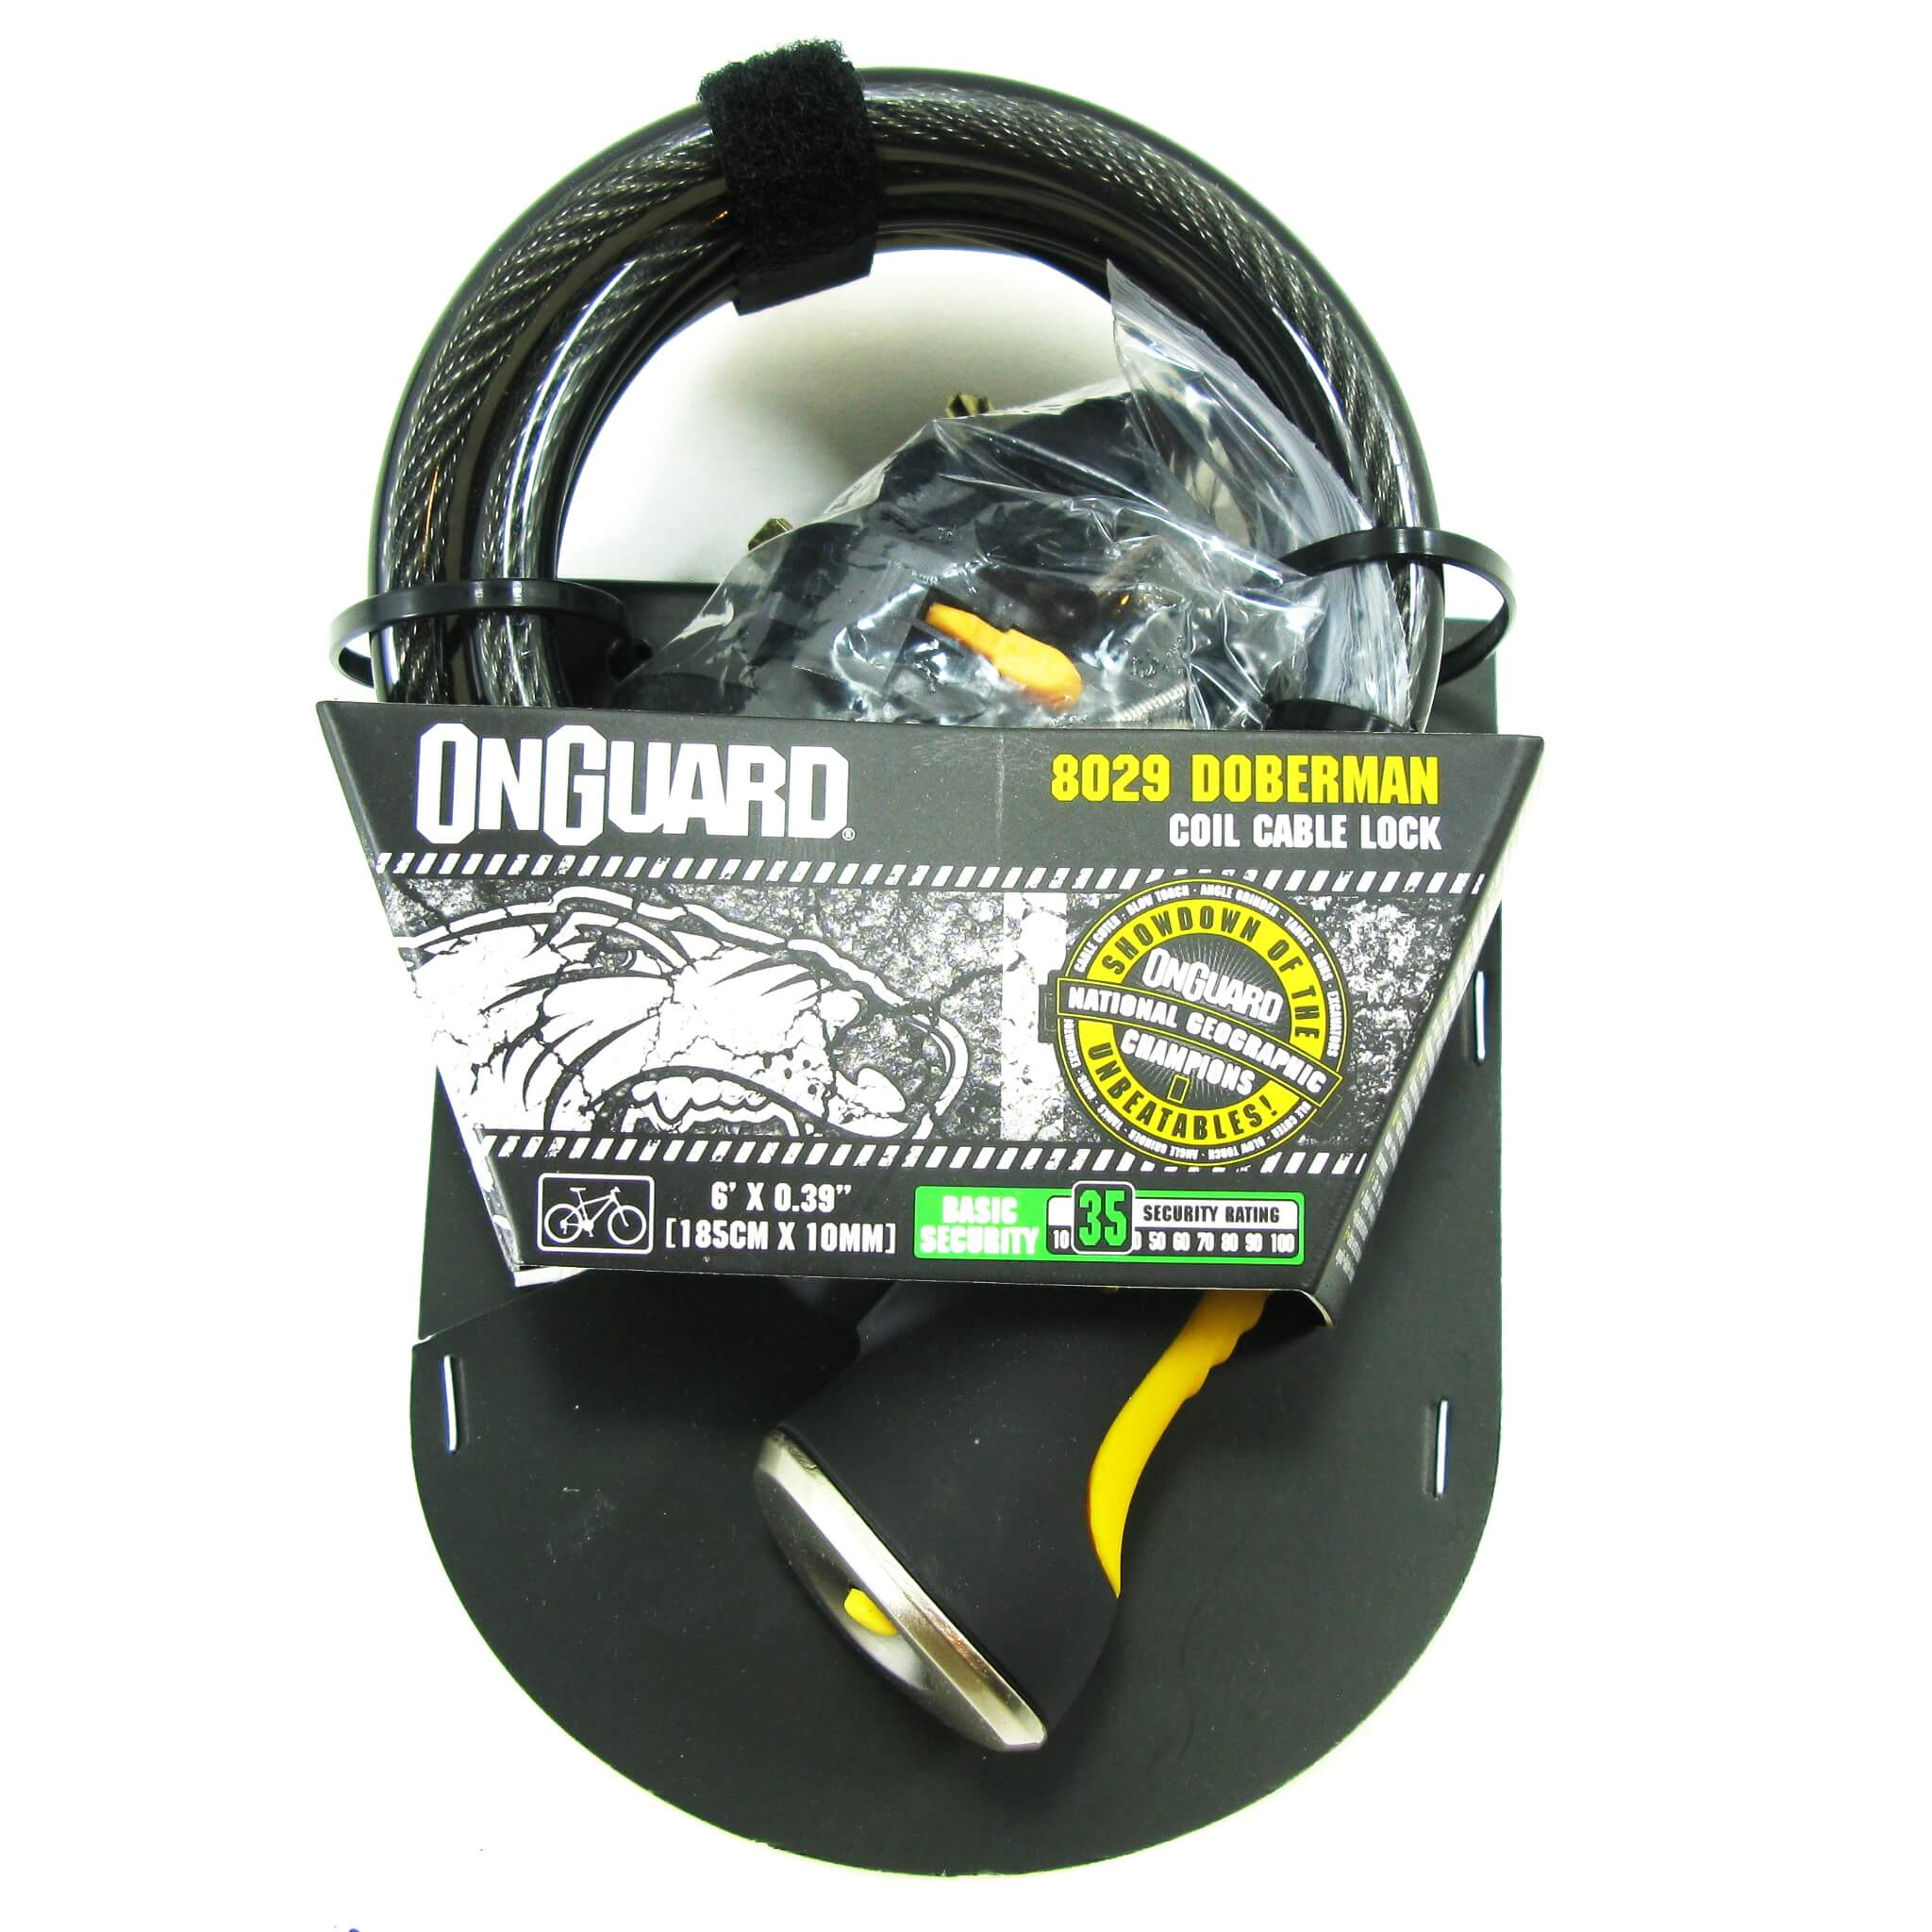 OnGuard Doberman 8029 With Key Lock 8mm x 6' Cable - TheBikesmiths